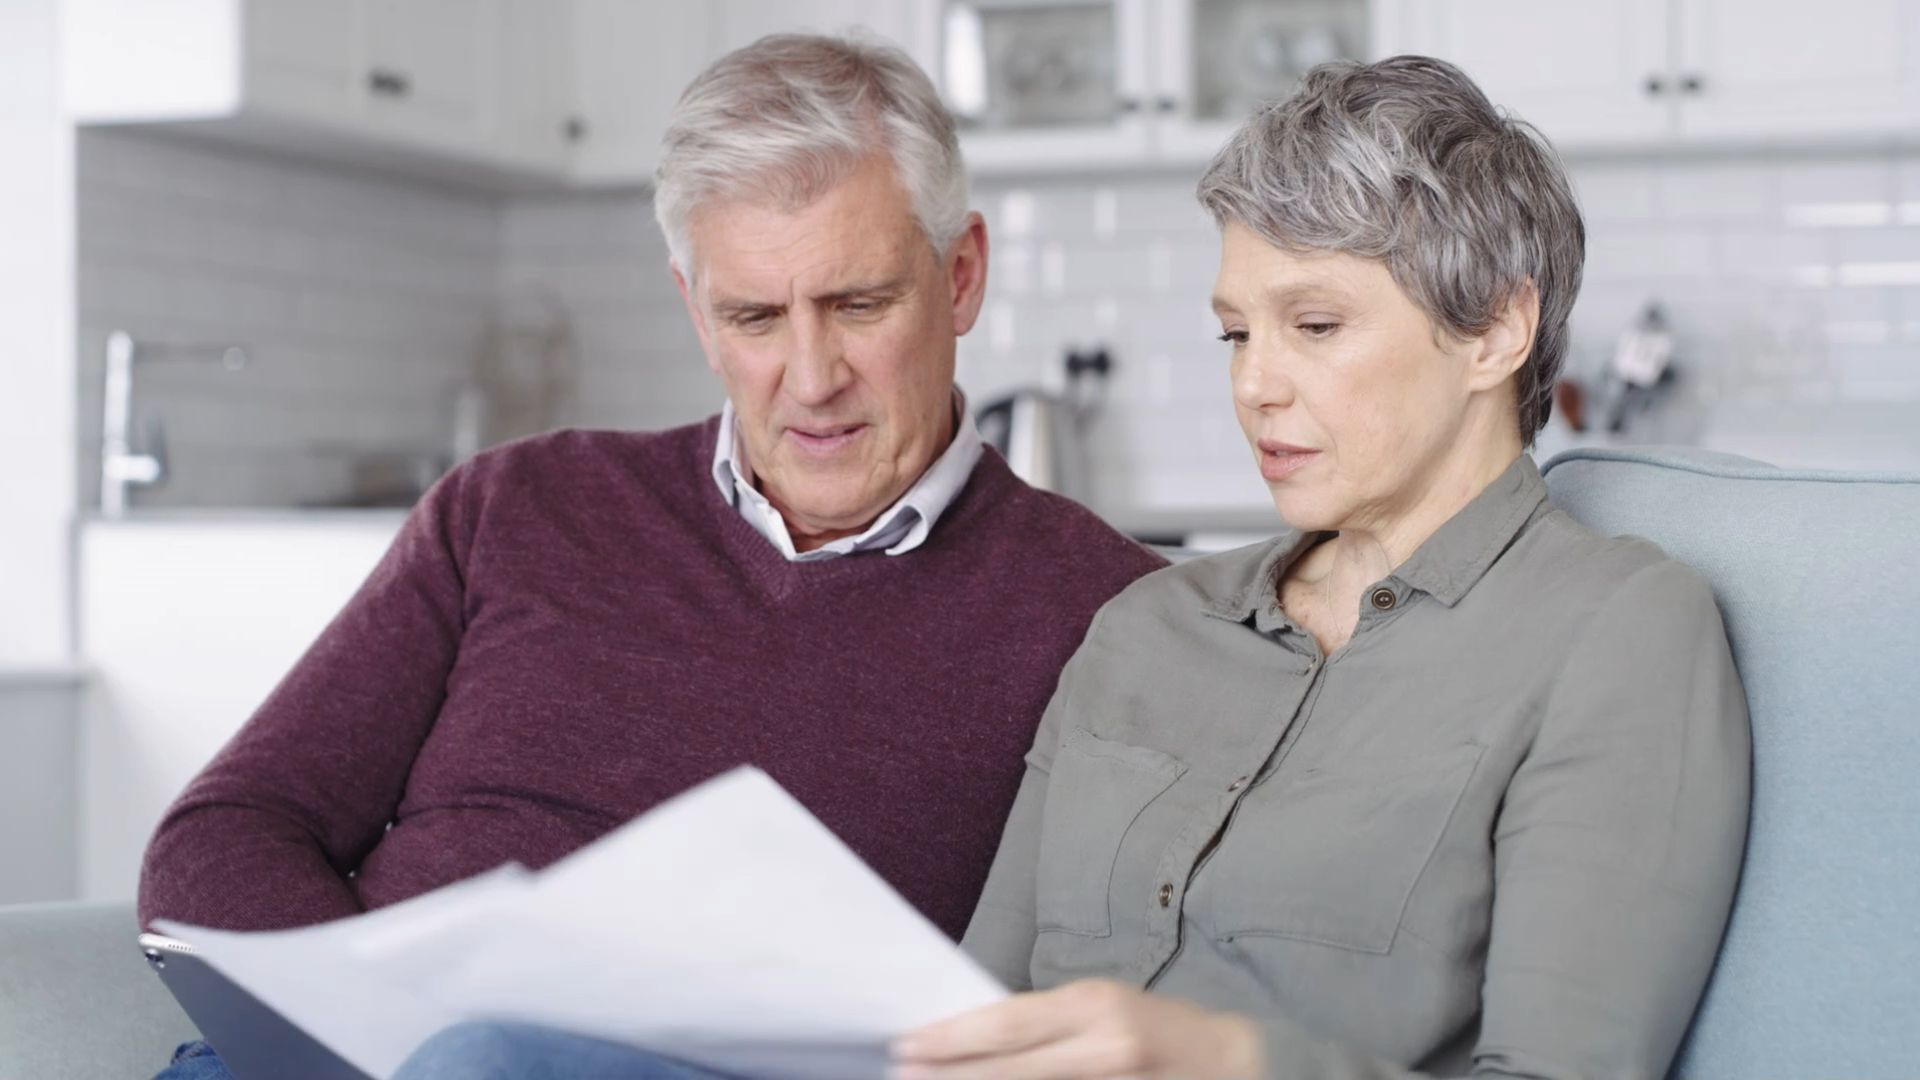 Pension tax: Growth Opportunities Act holds savings for pensioners